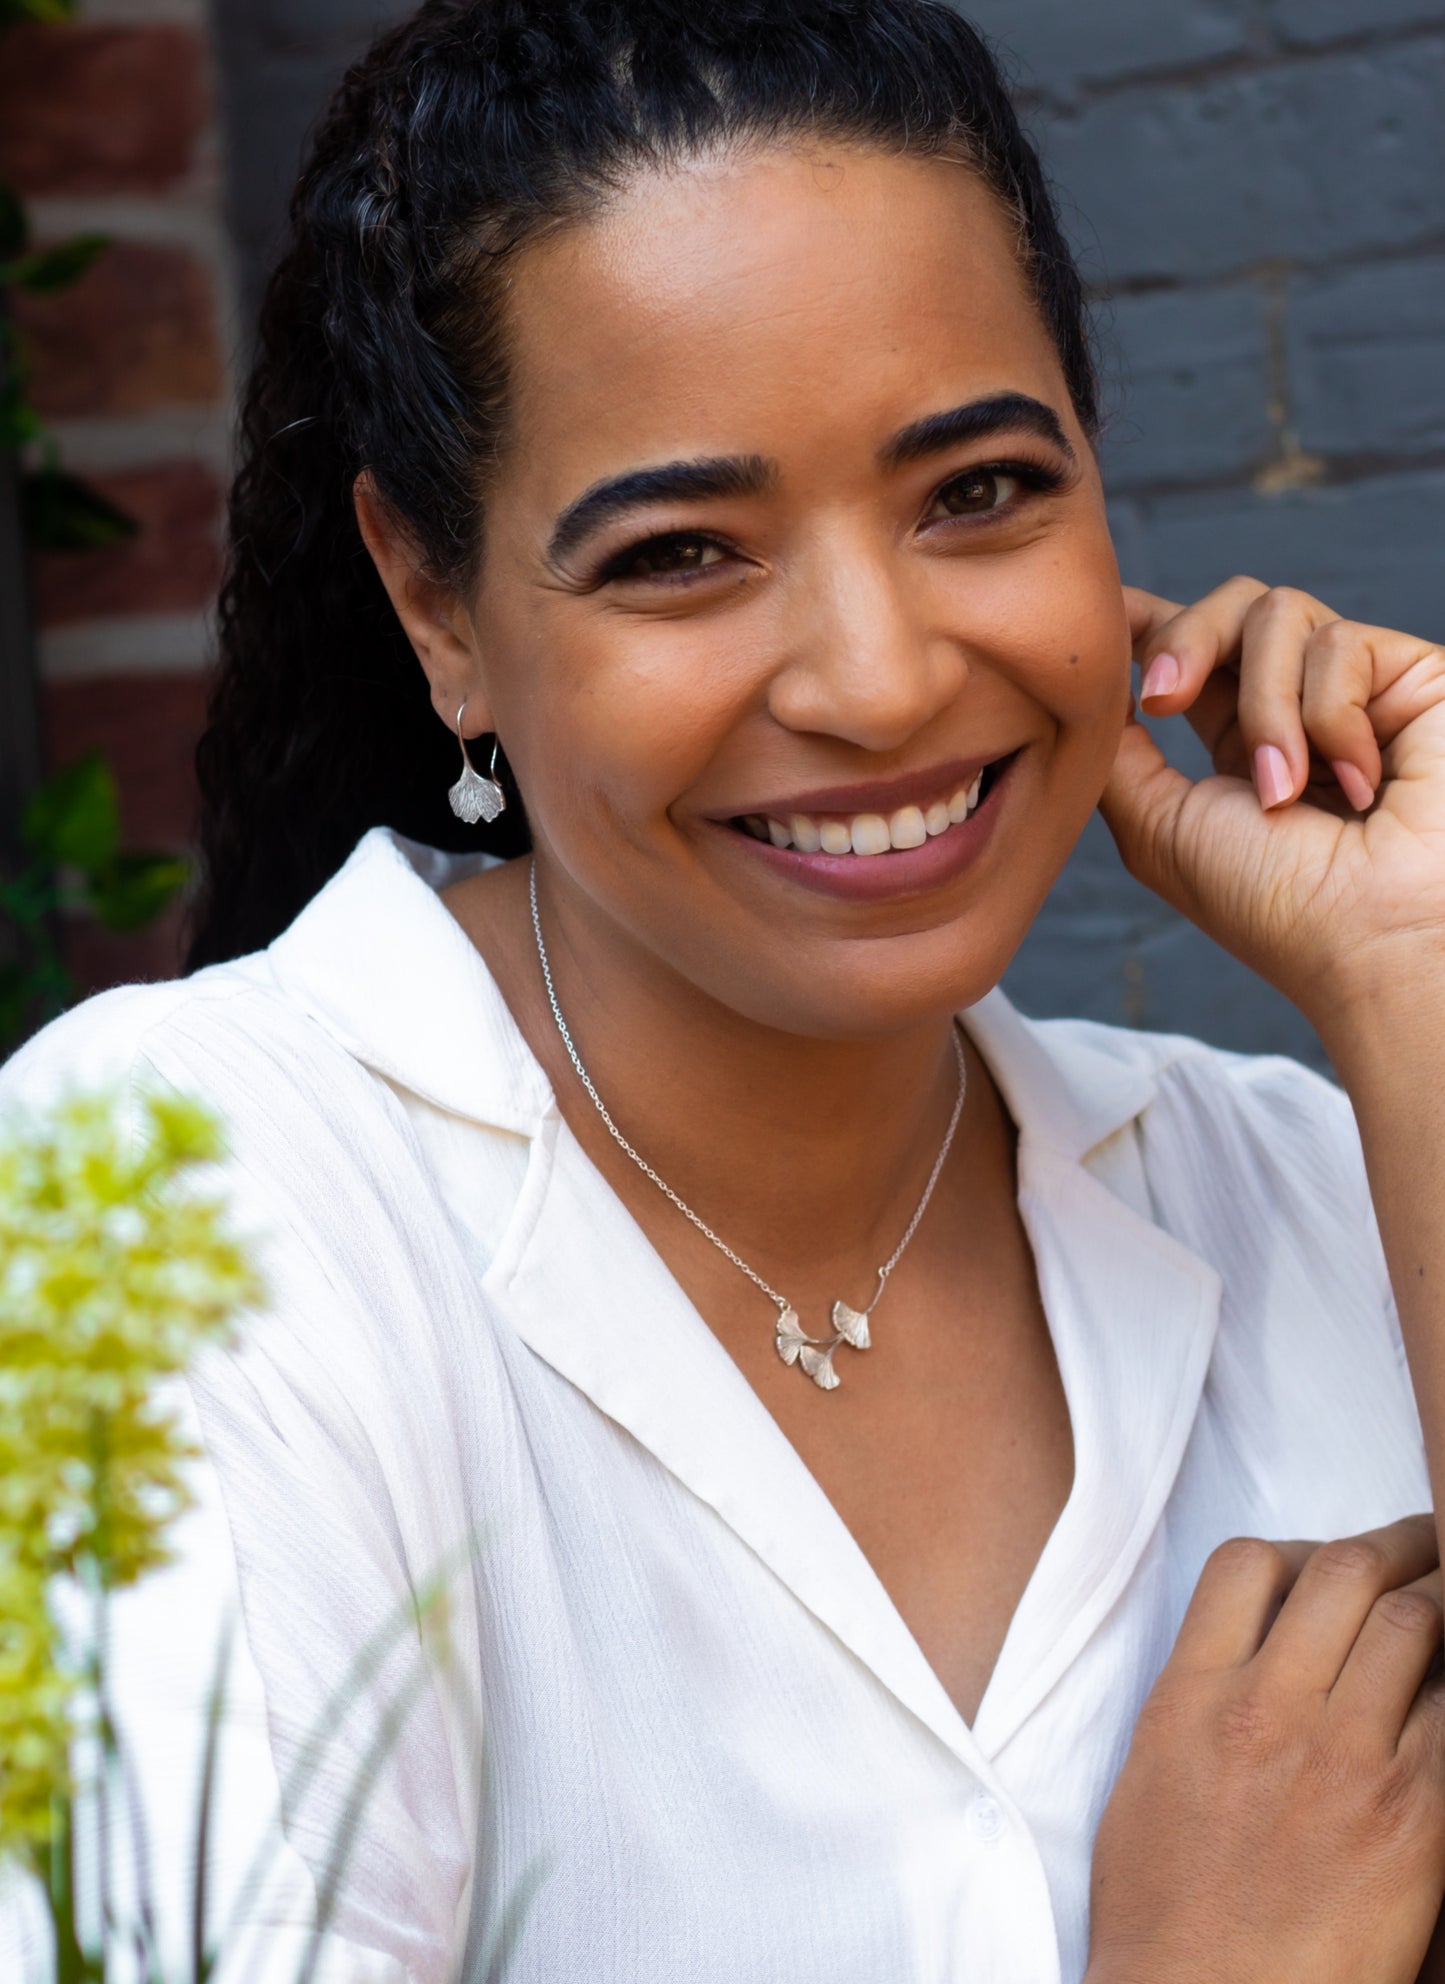 A smiling woman wearing ginkgo leaf dangle earrings and a necklace with three small ginkgo leaves